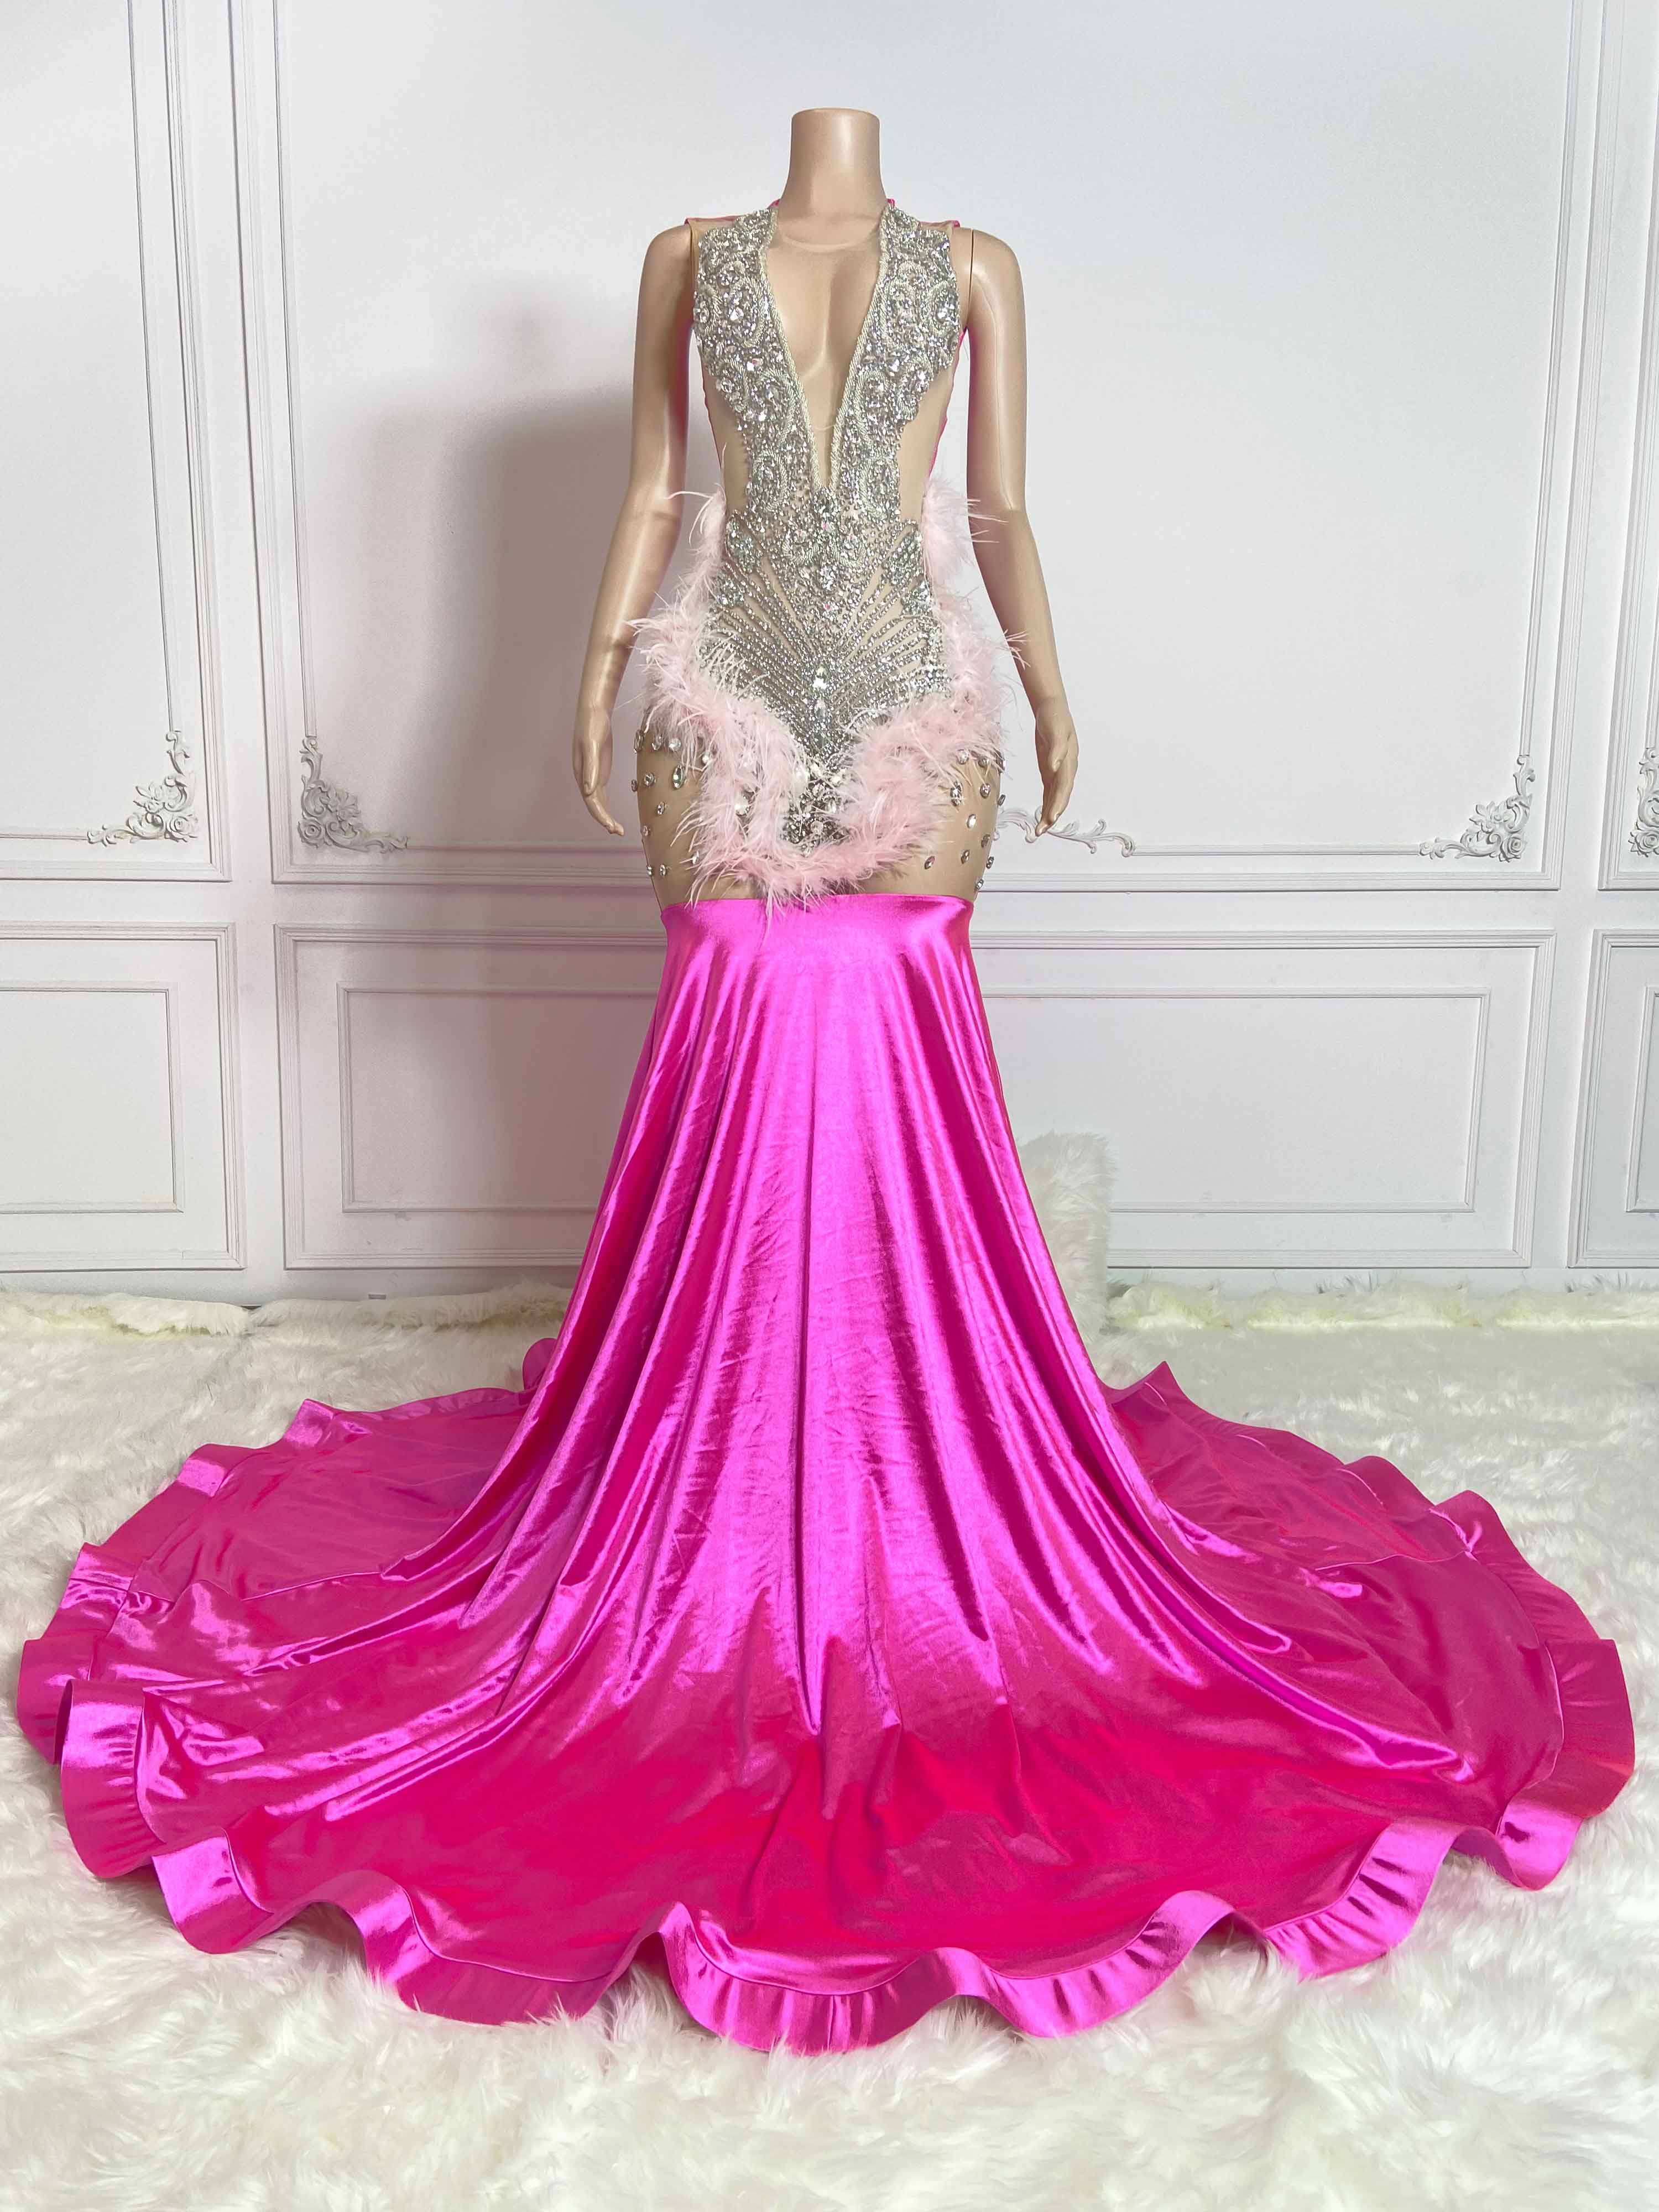 Rosy Low Cut and Rhinestone Sleeveless Maxi Gown